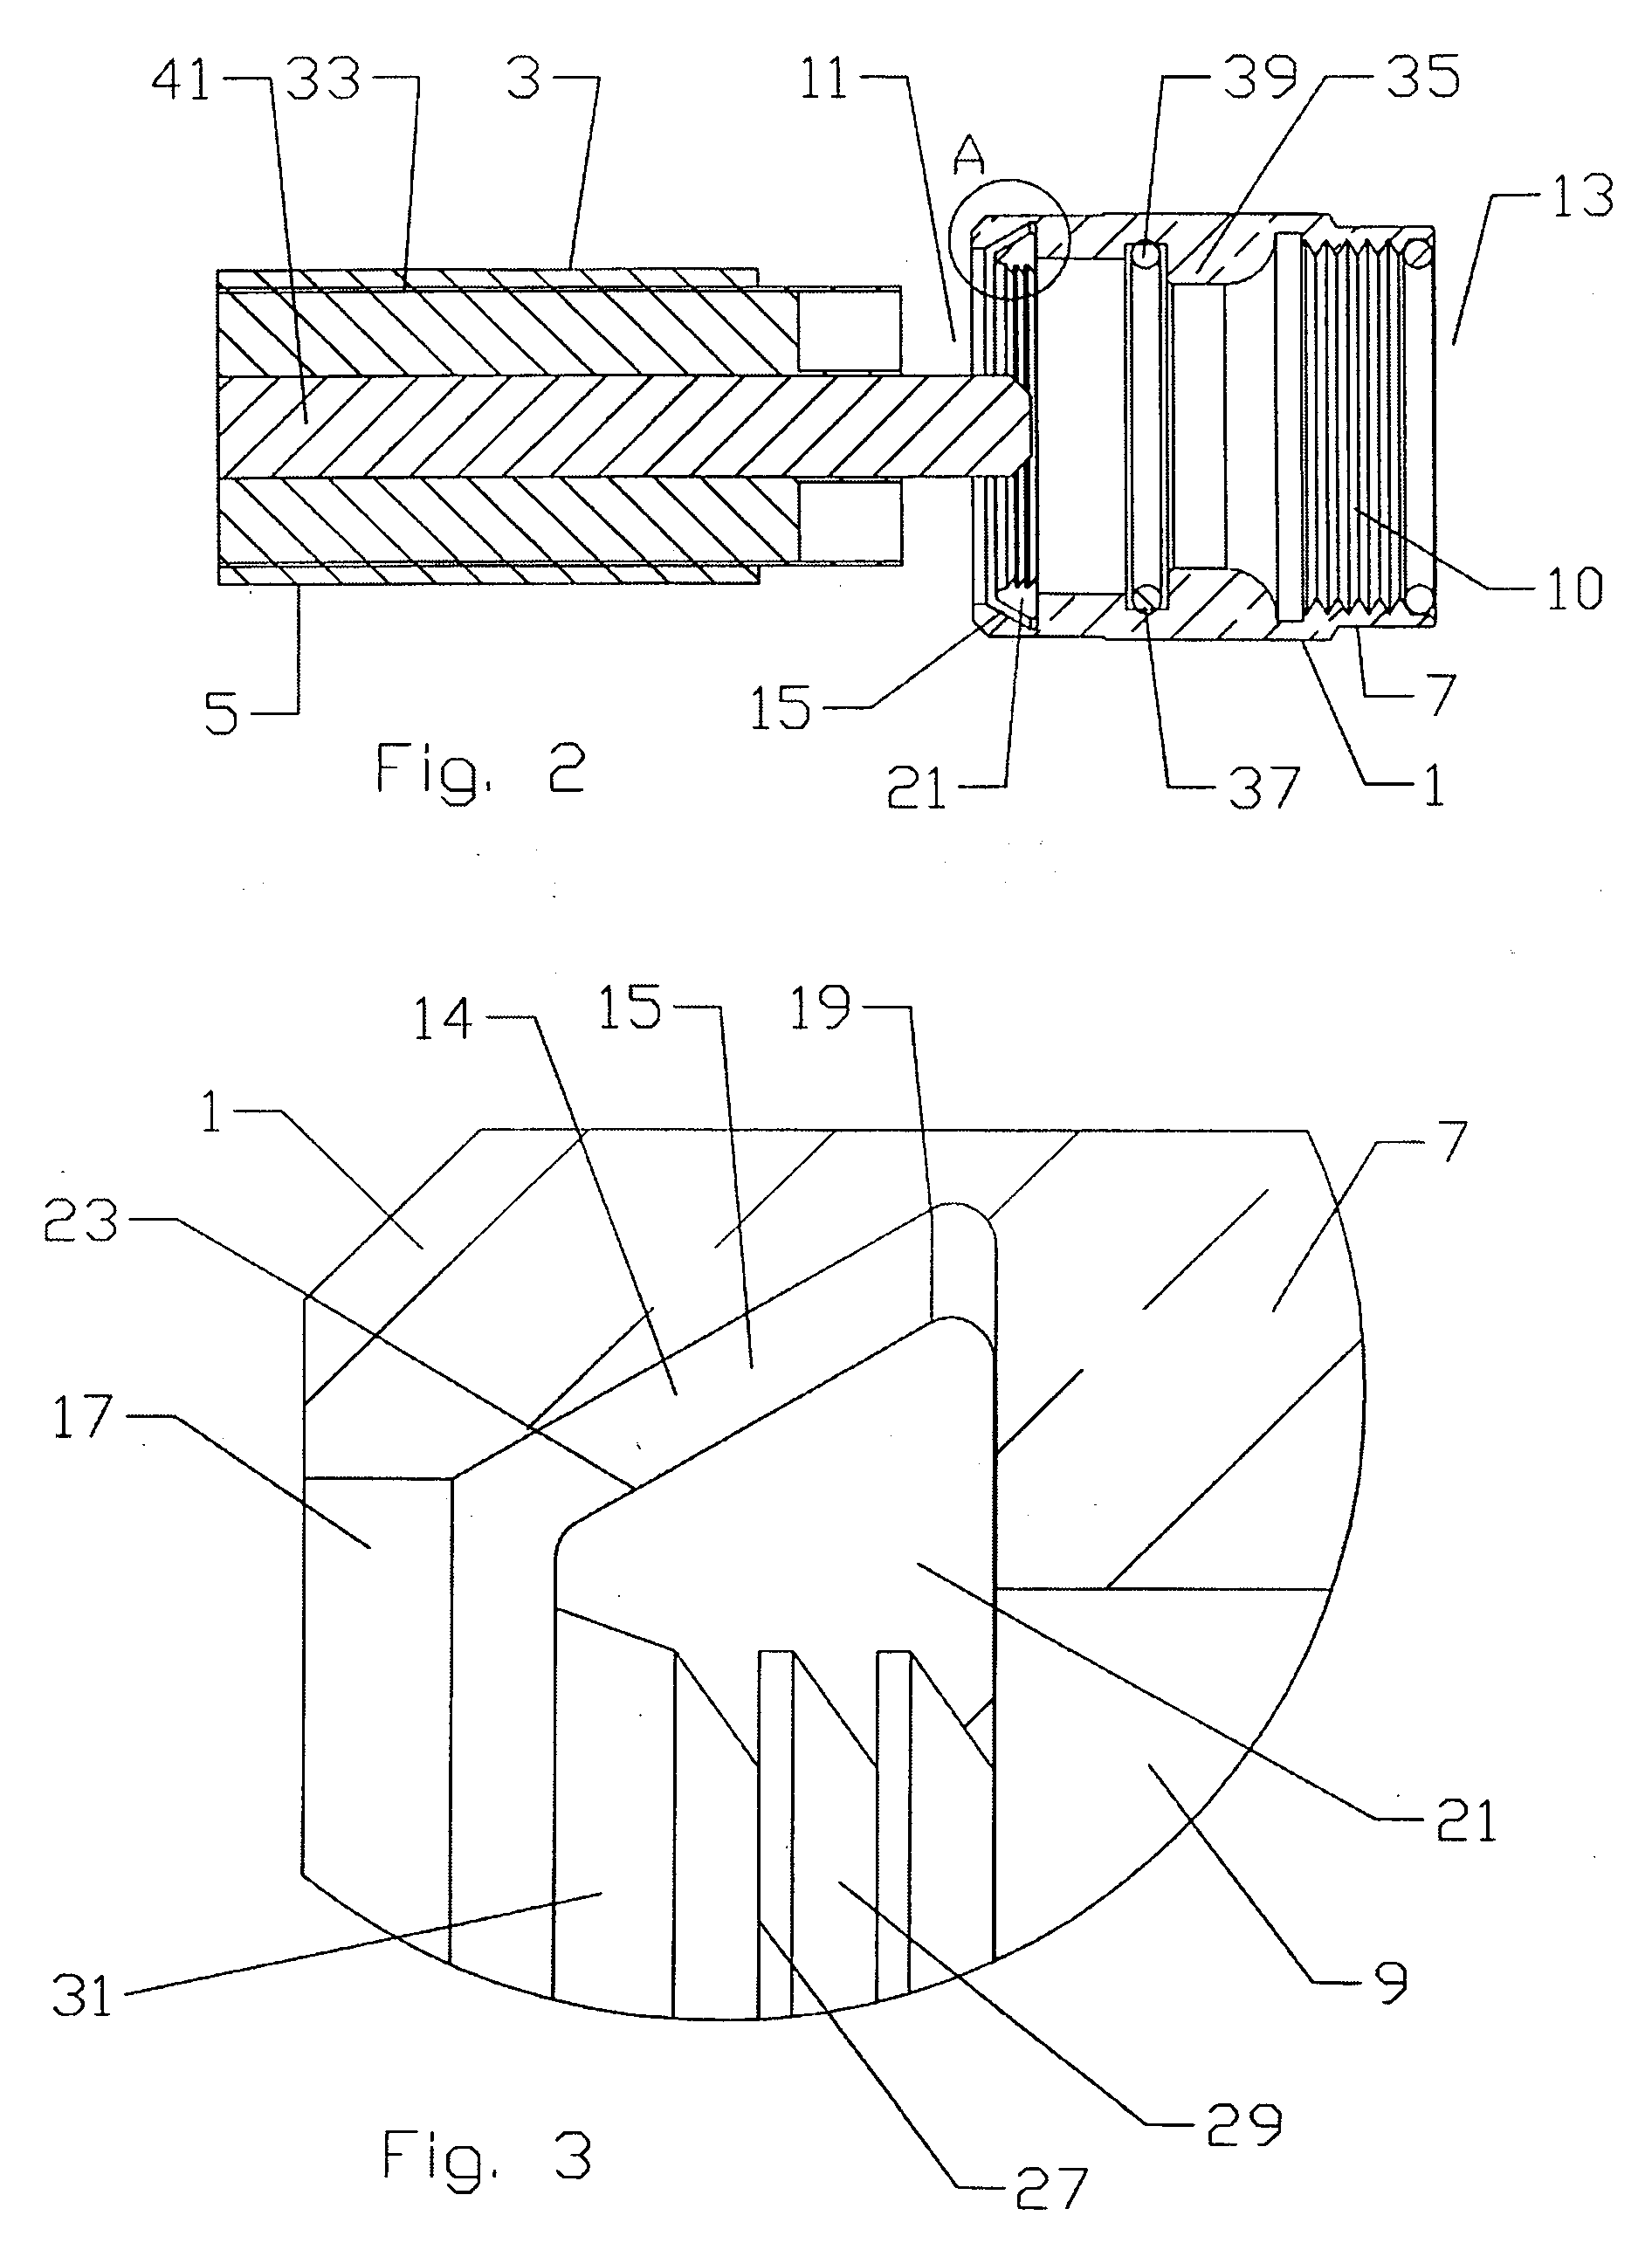 Coupling nut with cable jacket retention